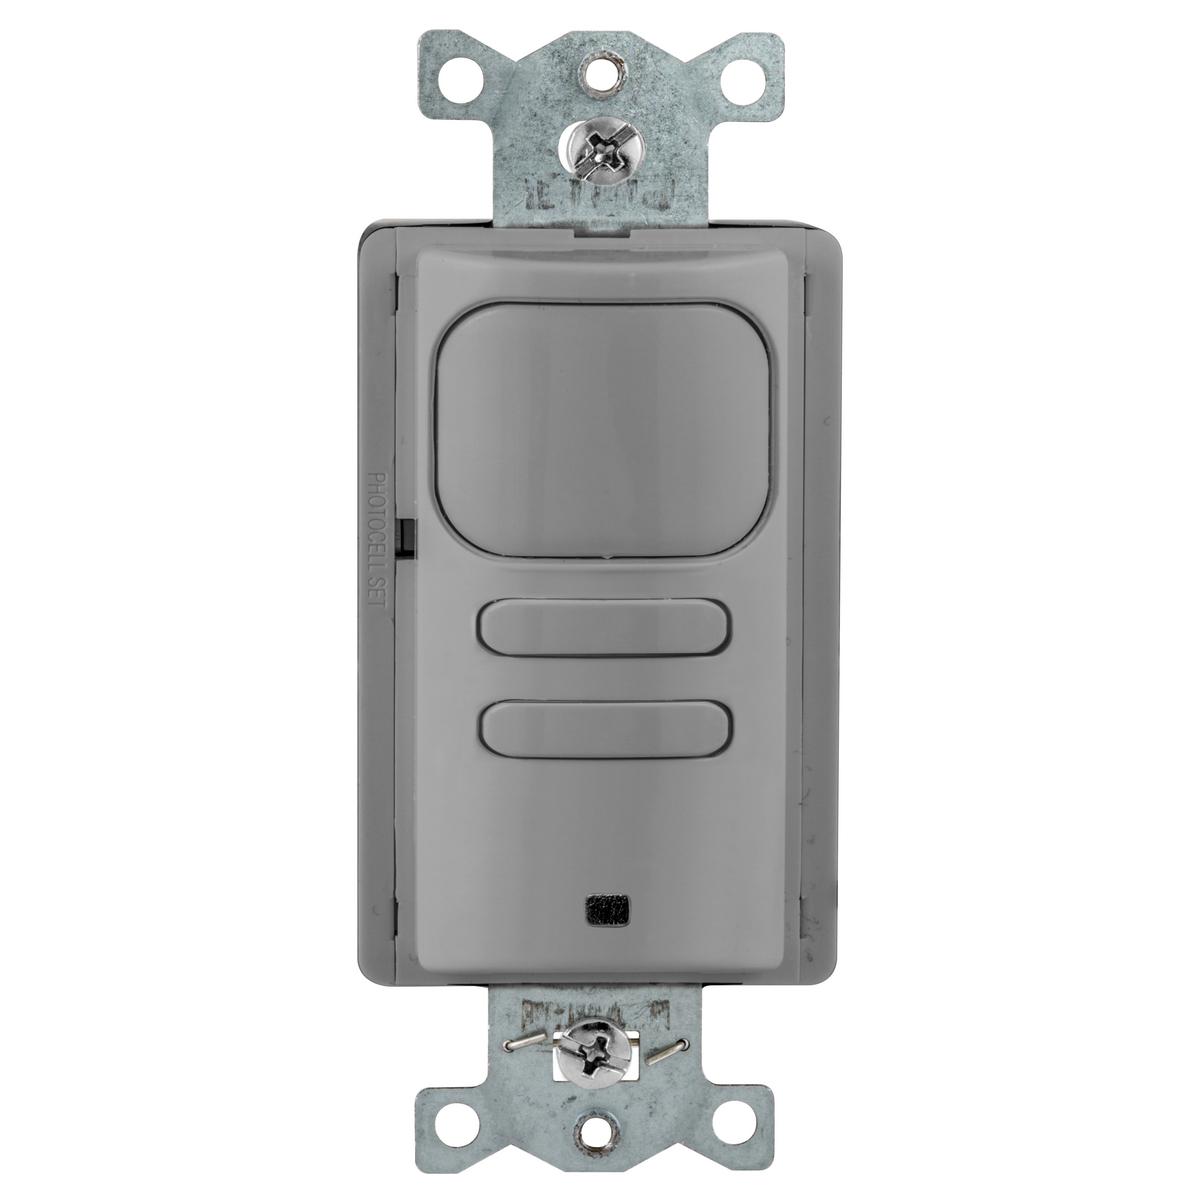 Hubbell AP2000GY22 Occupancy/Vacancy Sensors, Wall Switch,Adaptive Passive Infrared, 2 Circuit, 120/277V AC, Gray 